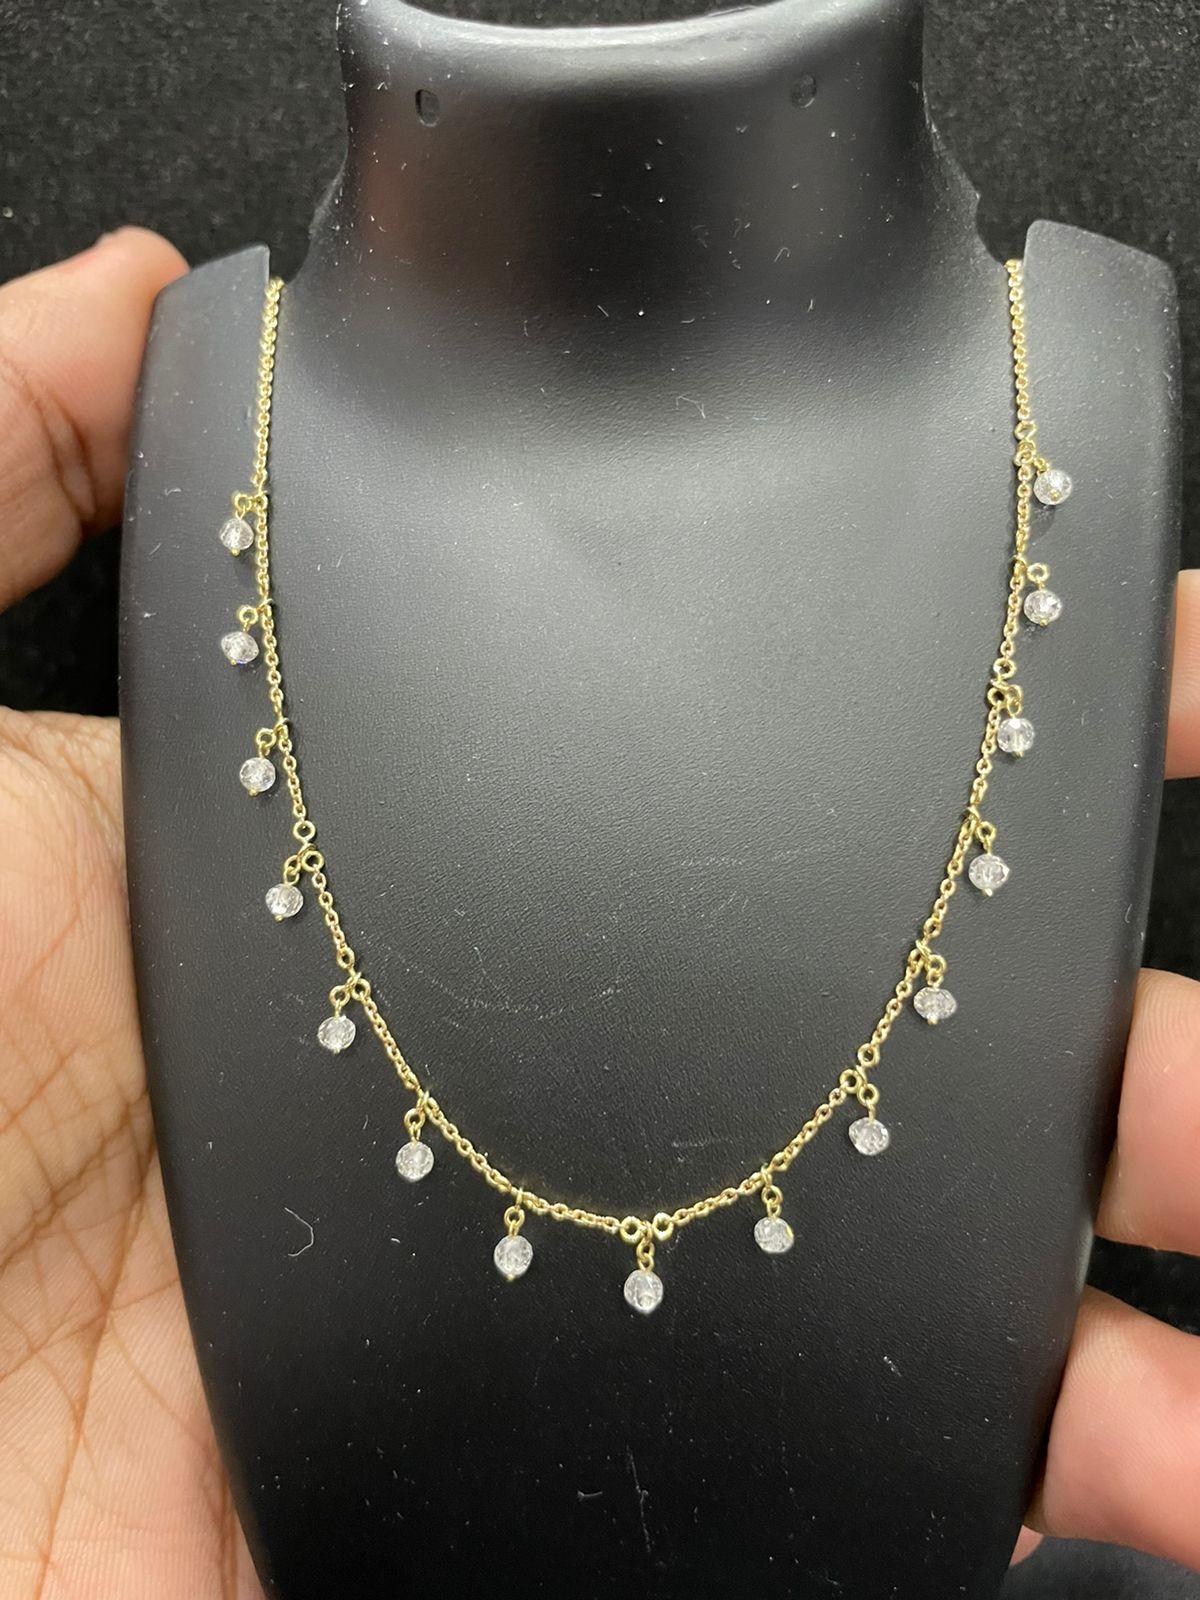 PANIM 18K White Gold Diamond Beads Dangling Necklace For Sale 2